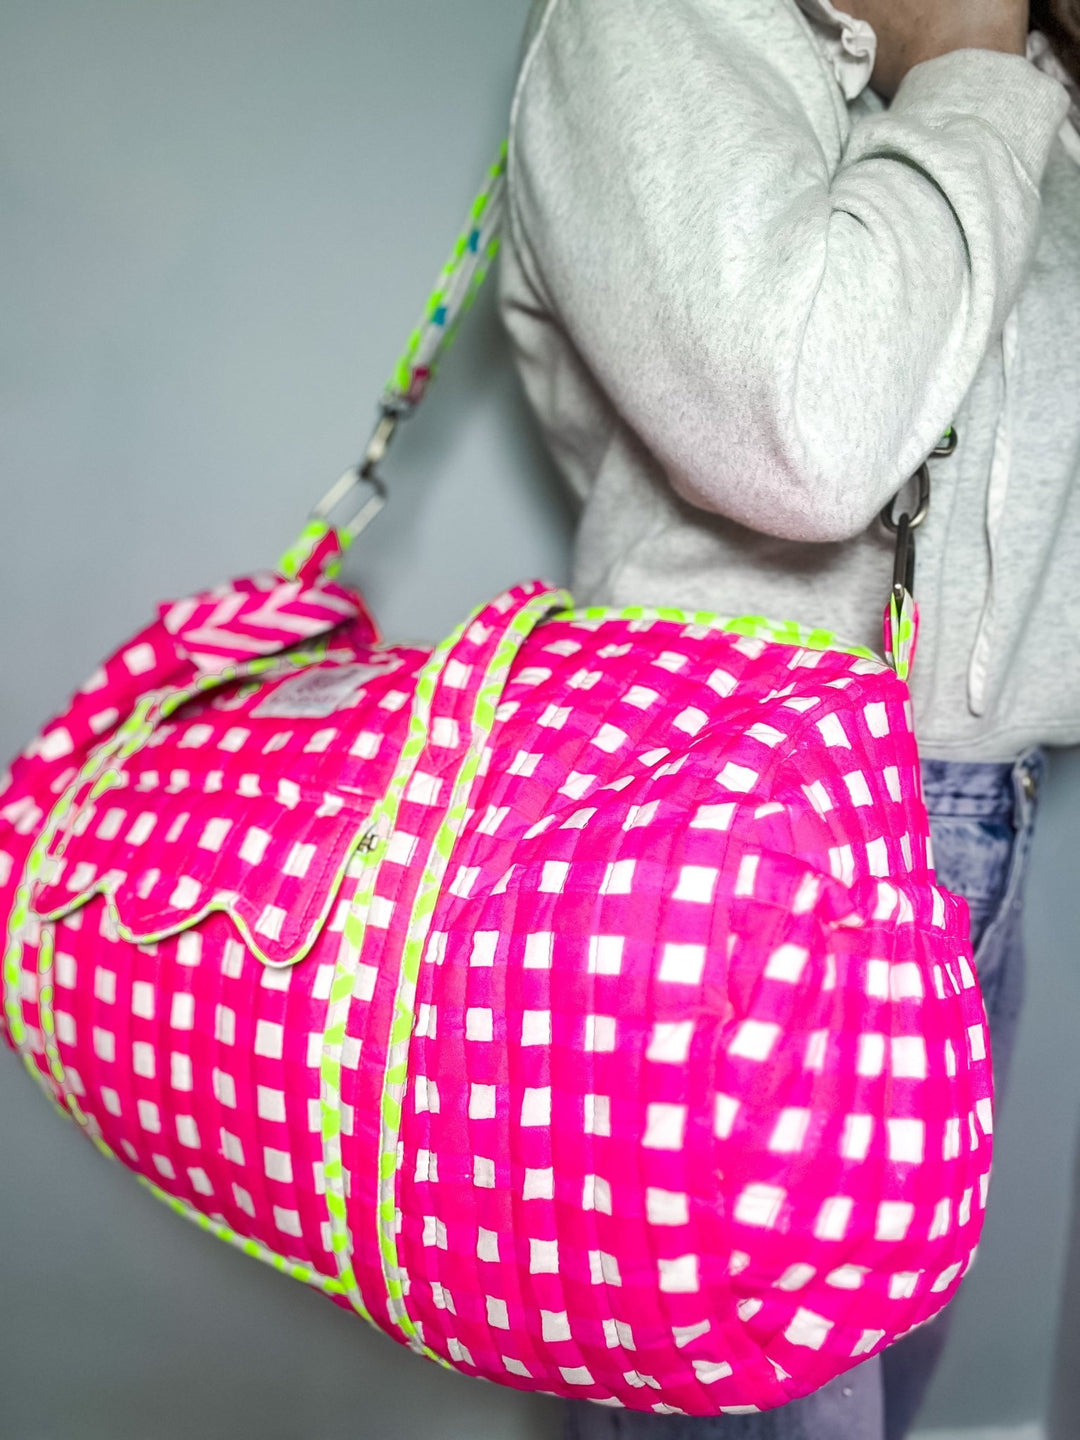 Neon Pink Check | Quilted Weekend Bag - Bombaby